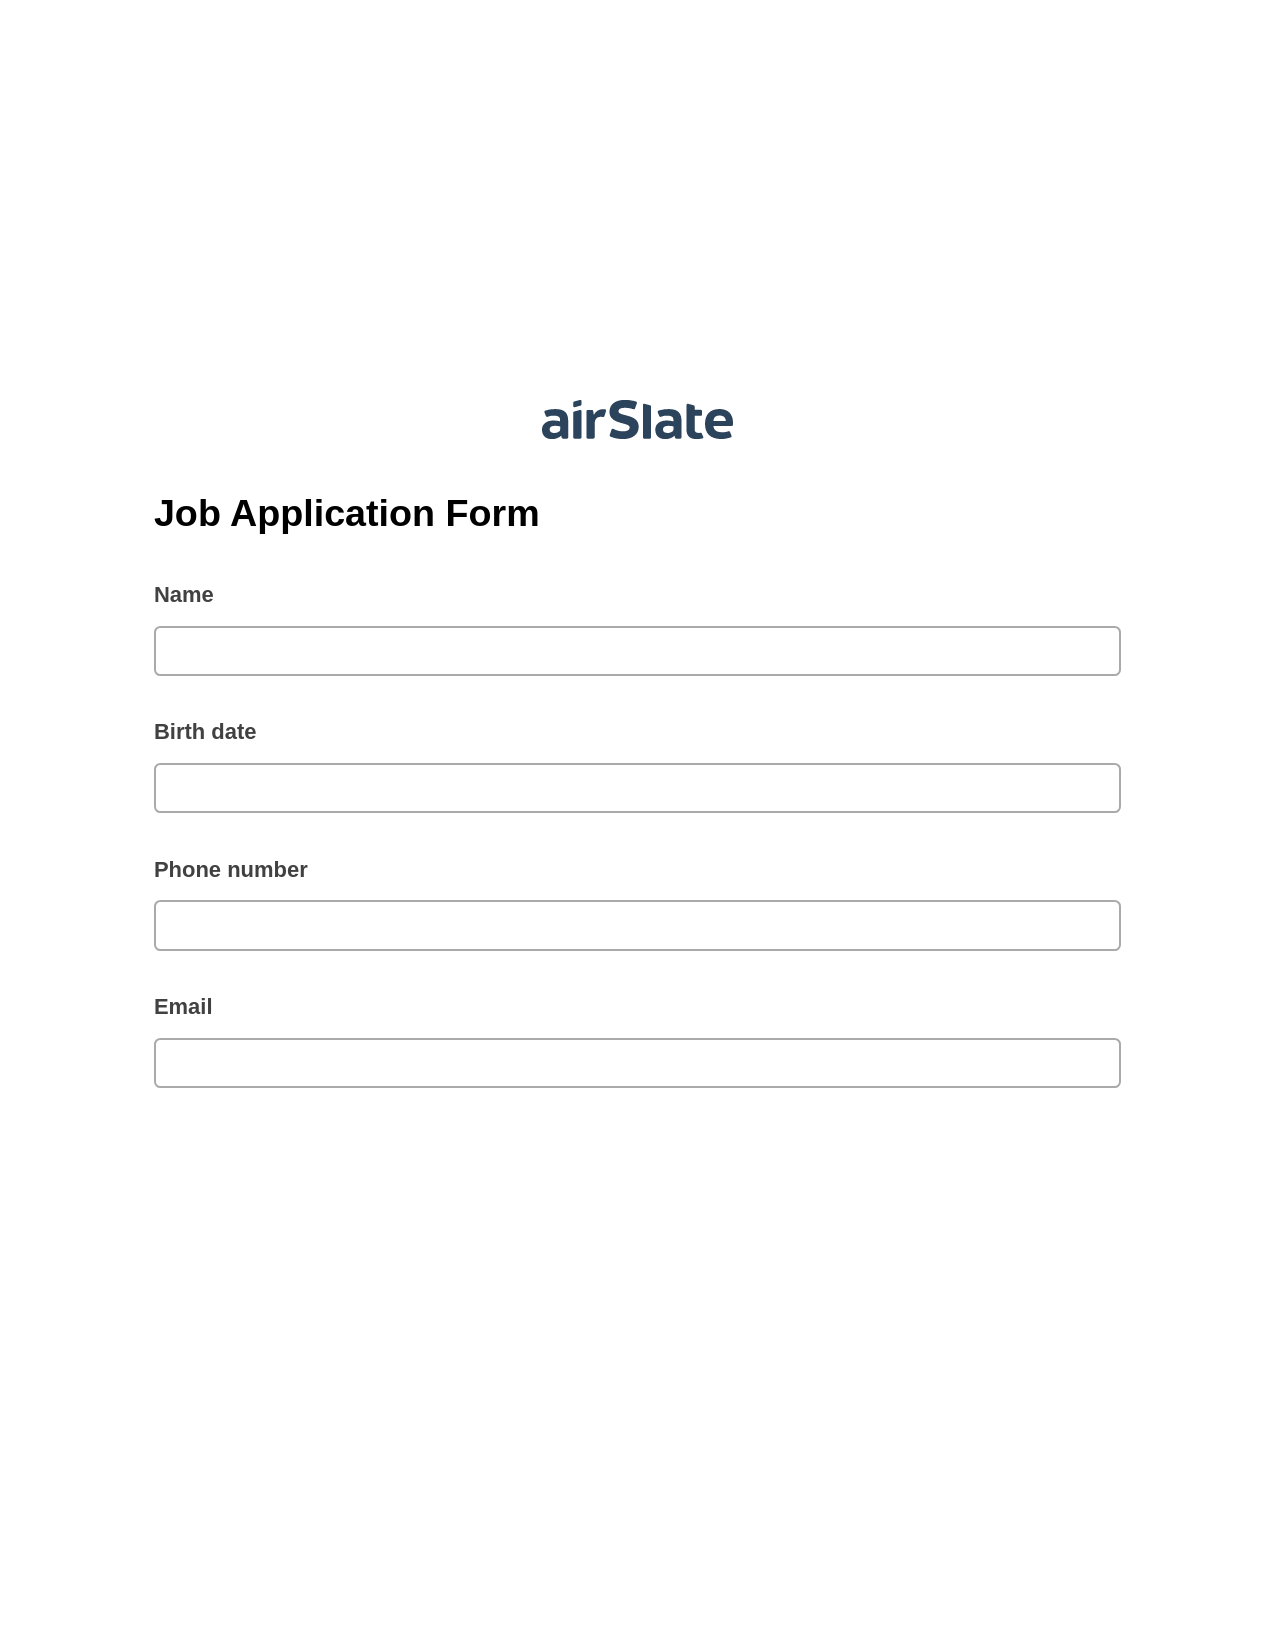 Job Application Form Pre-fill Slate from MS Dynamics 365 Records Bot, Send a Slate to Salesforce Contact Bot, Export to Formstack Documents Bot